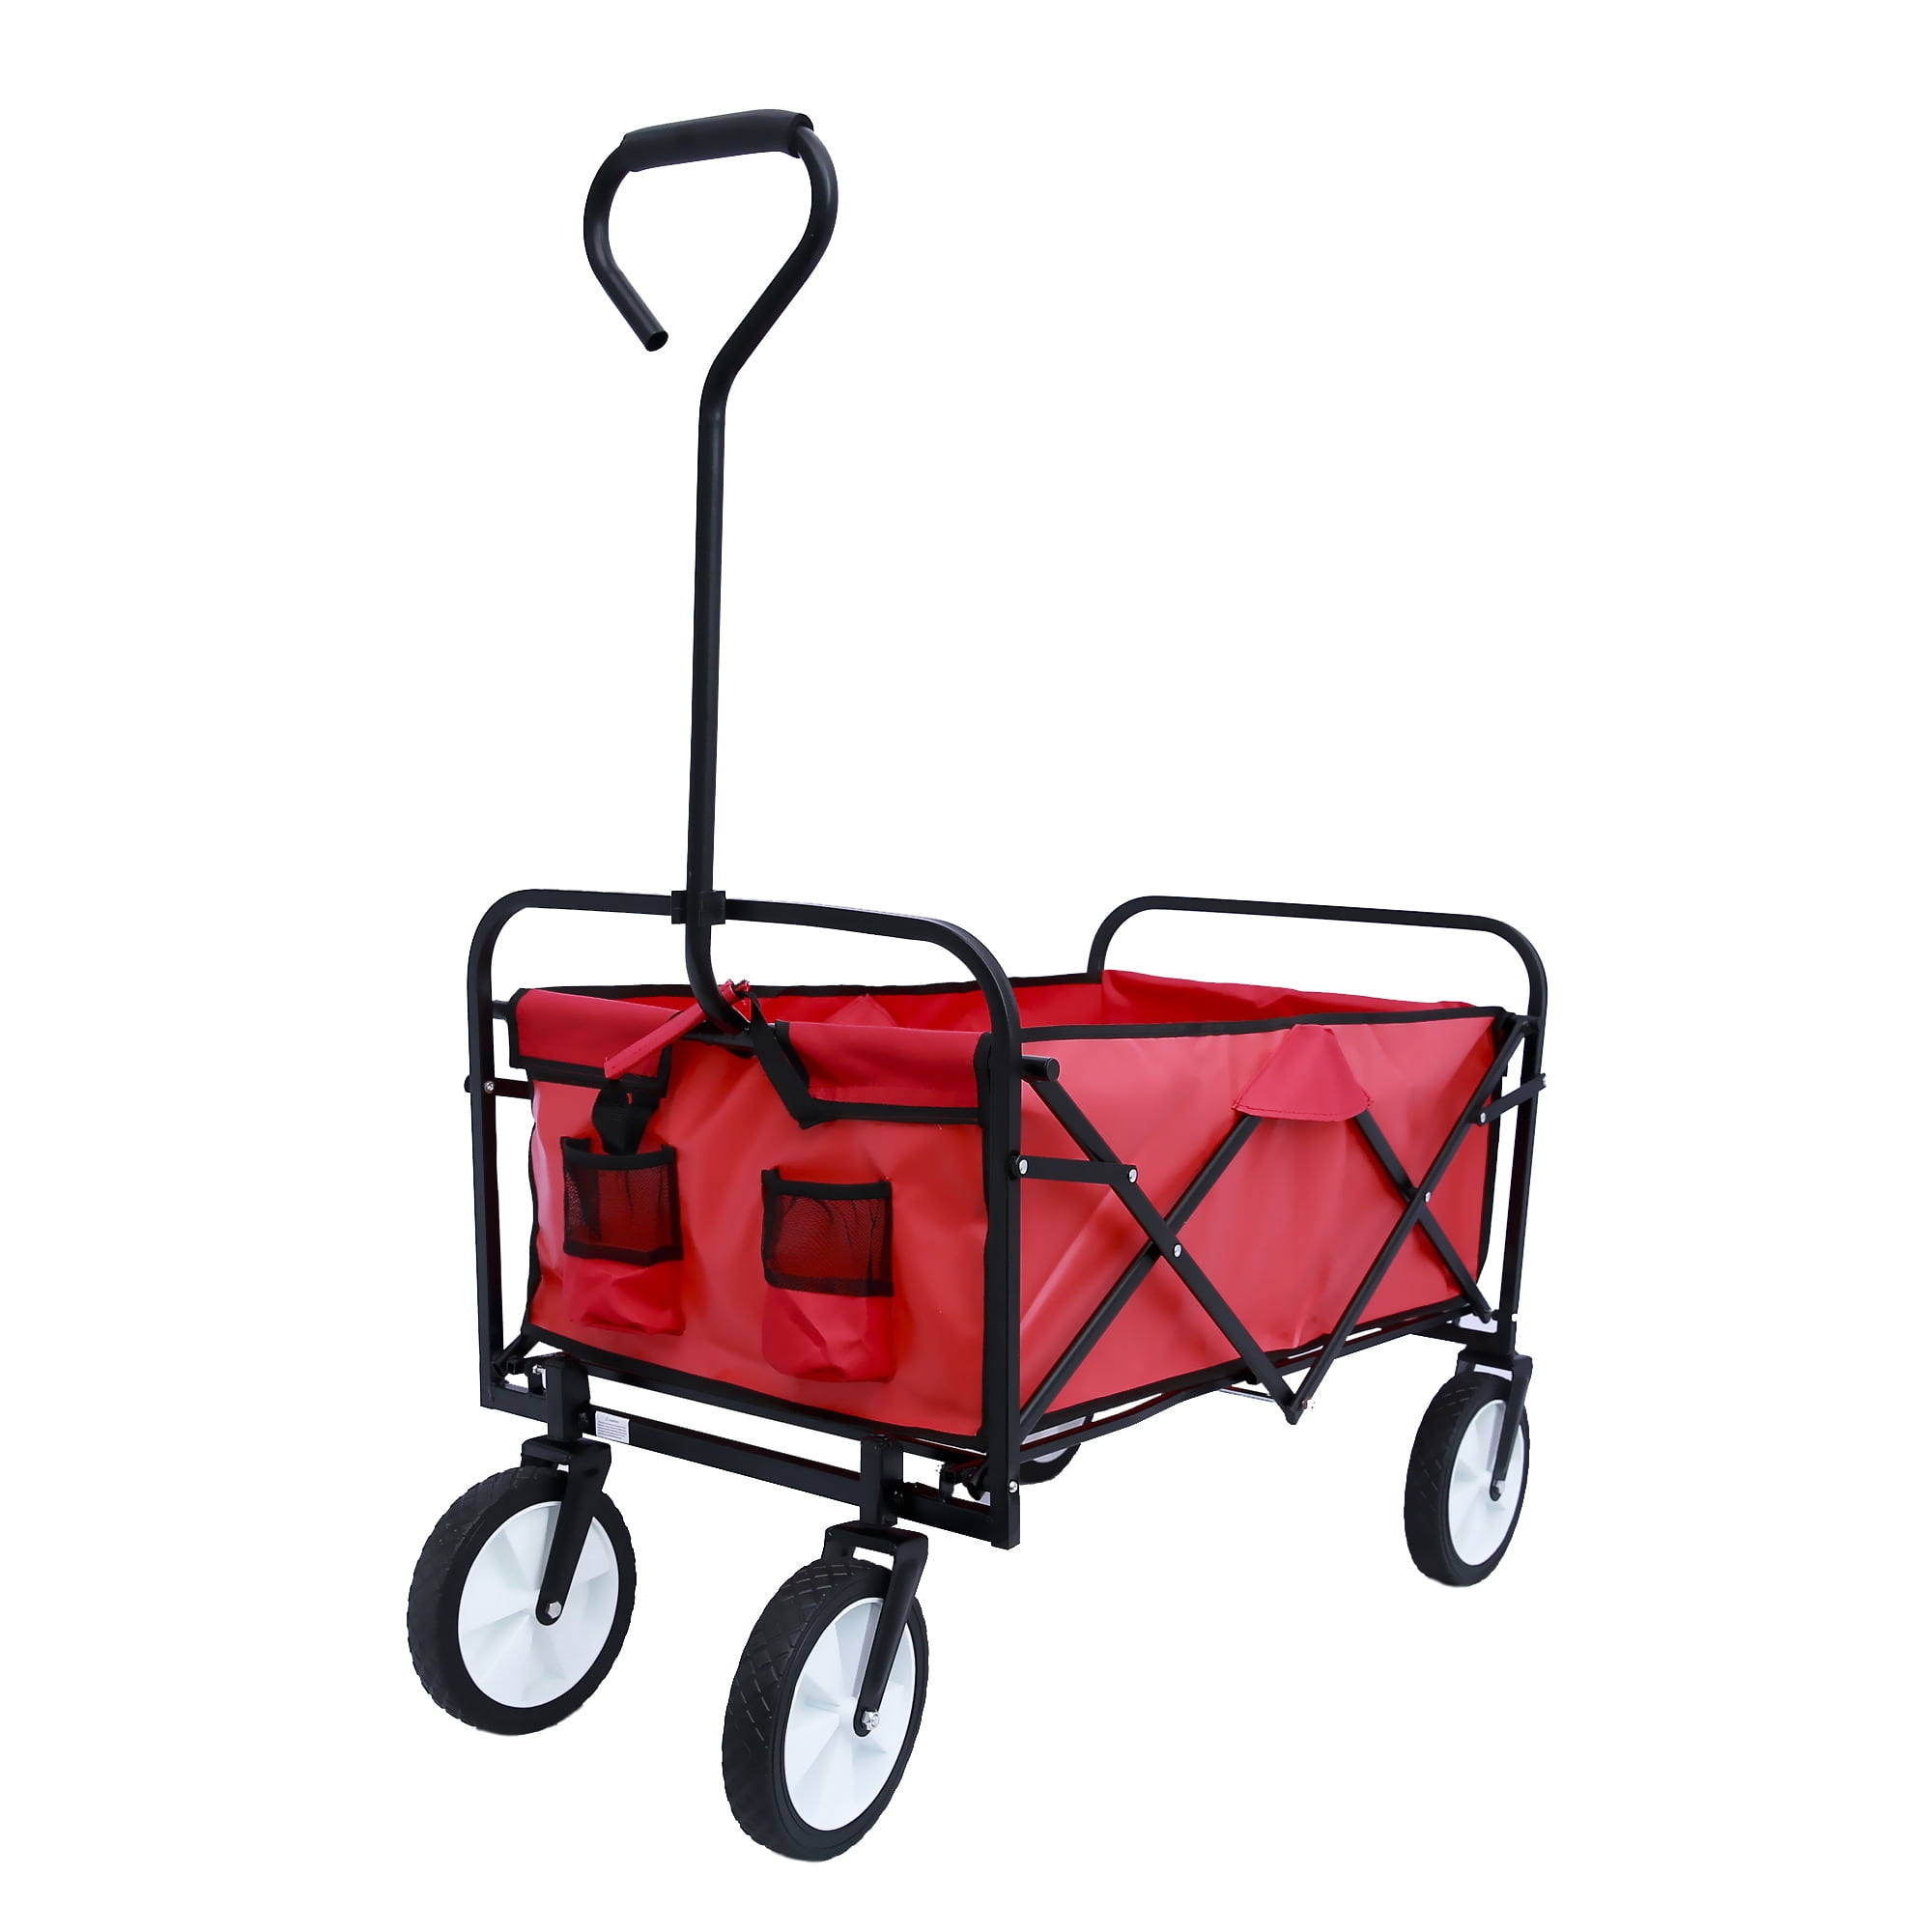 Hooseng Foldable Pull Wagon Hand Garden Transport Collapsible Portable Folding Cart Red 